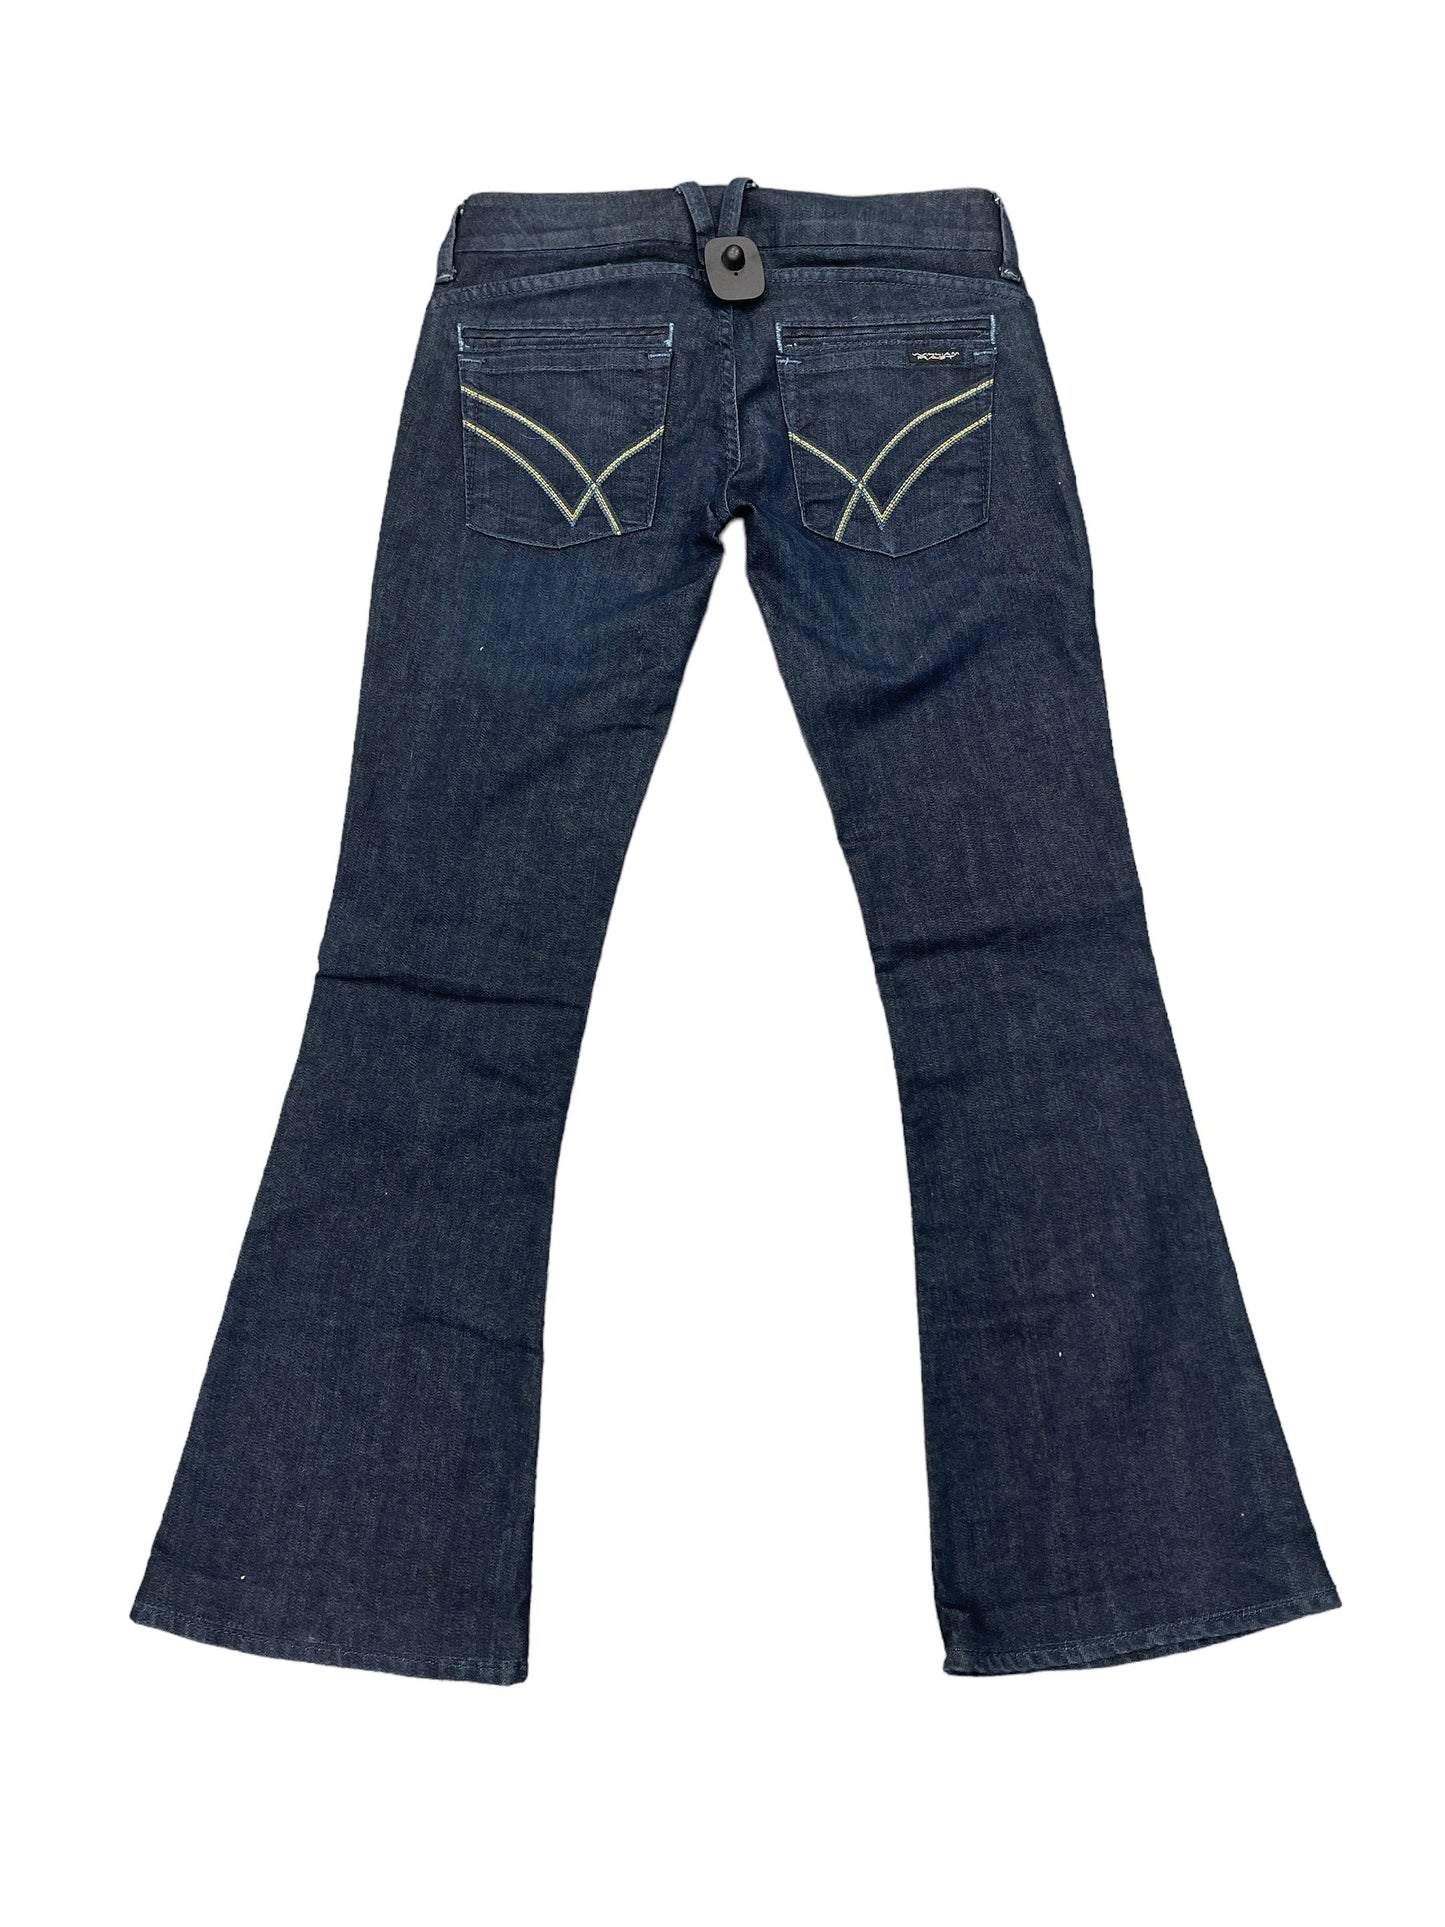 Jeans Boot Cut By William Rast  Size: 4